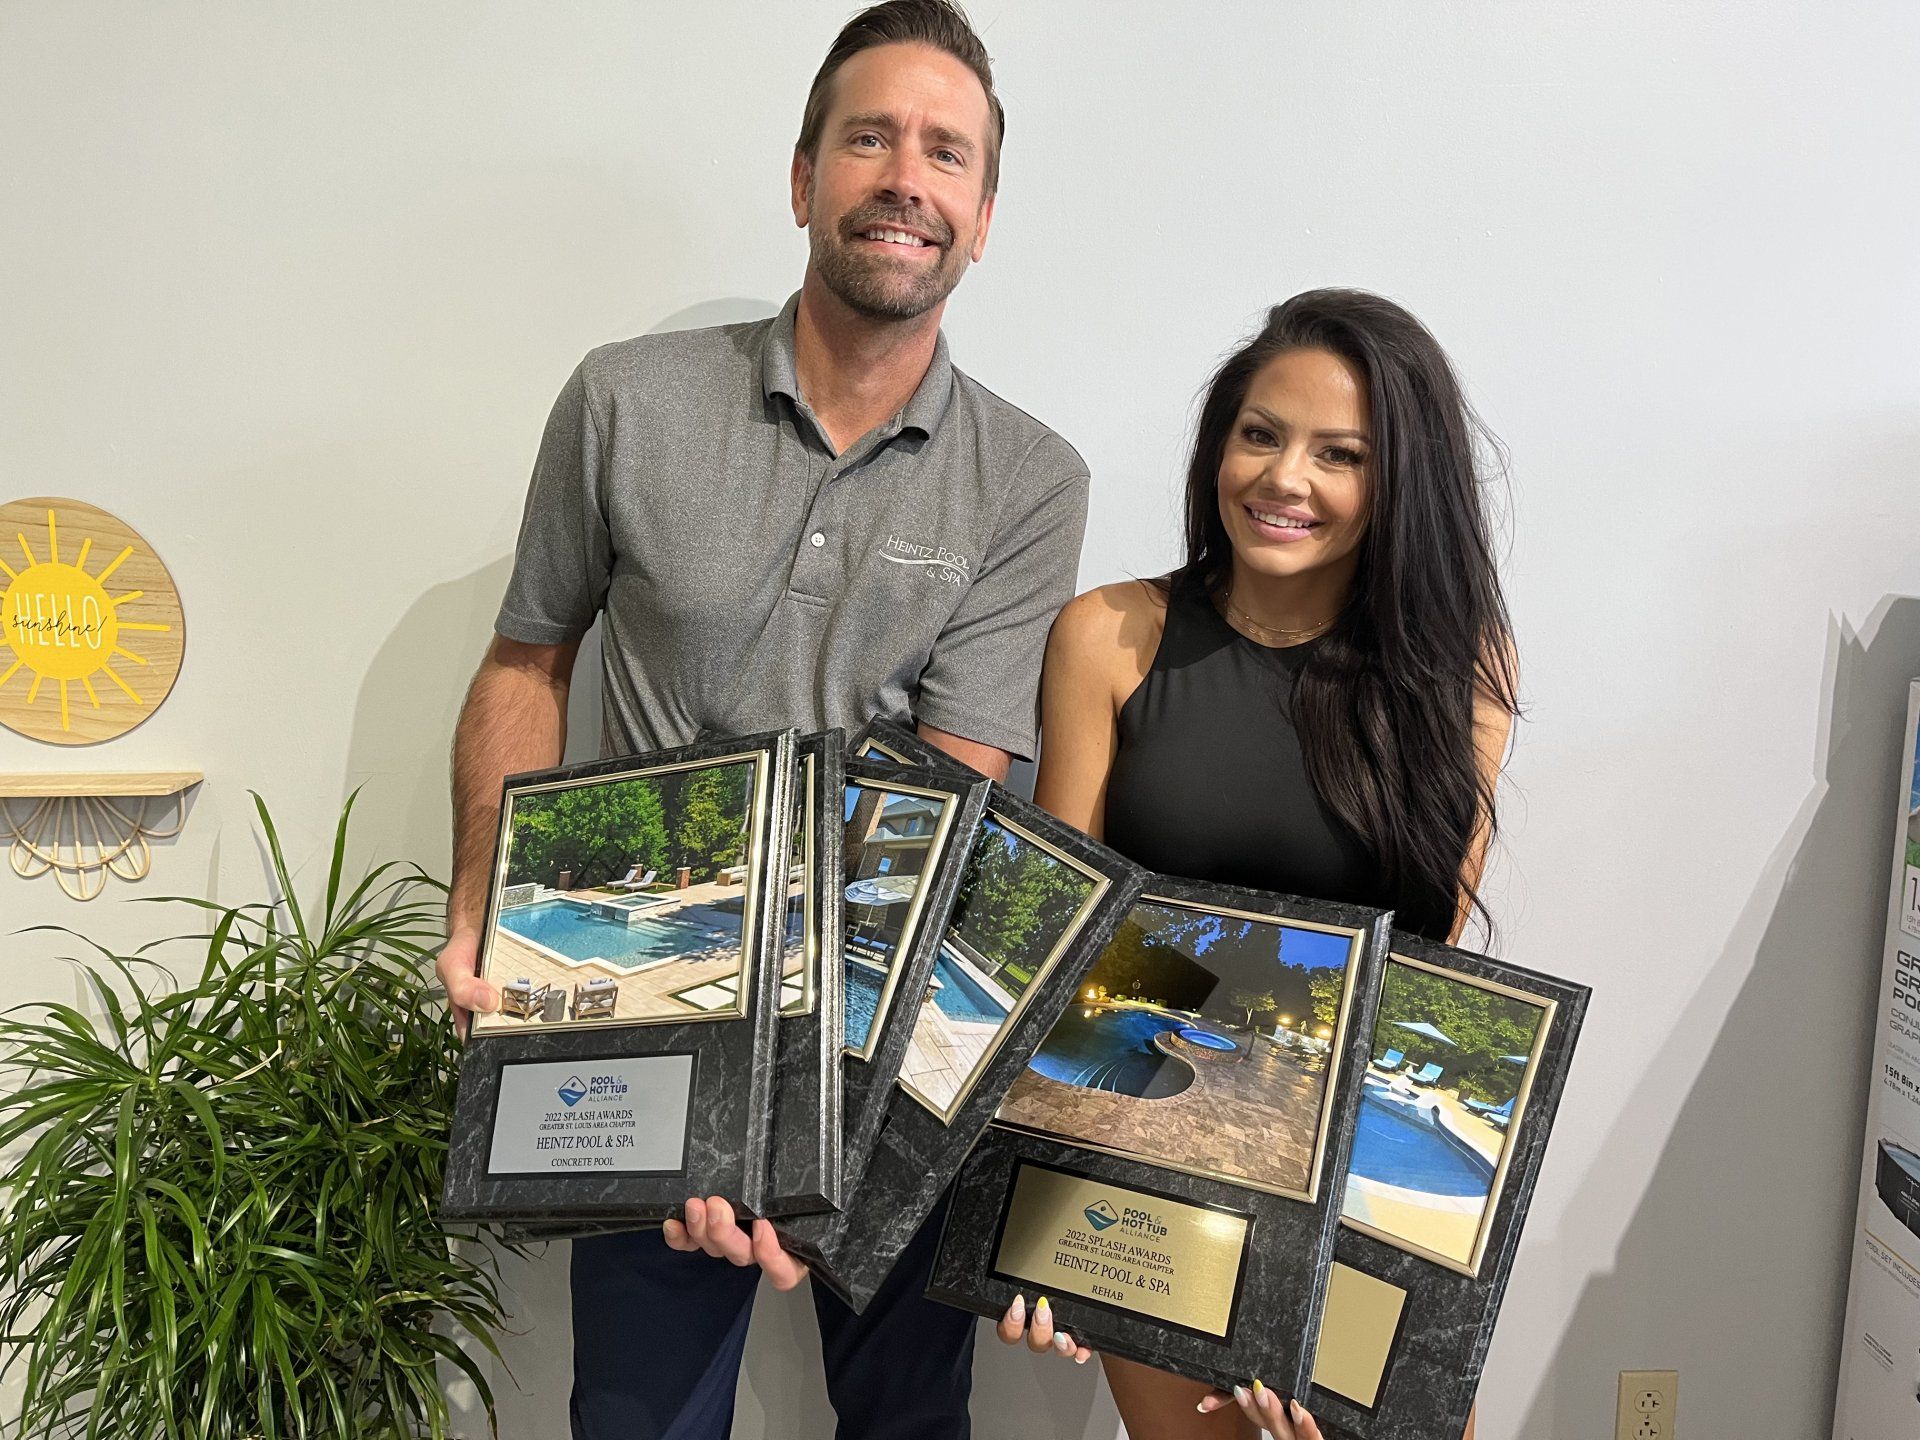 Owner of Heintz Pool & Spa with his partner holding awards for their pool and spa projects